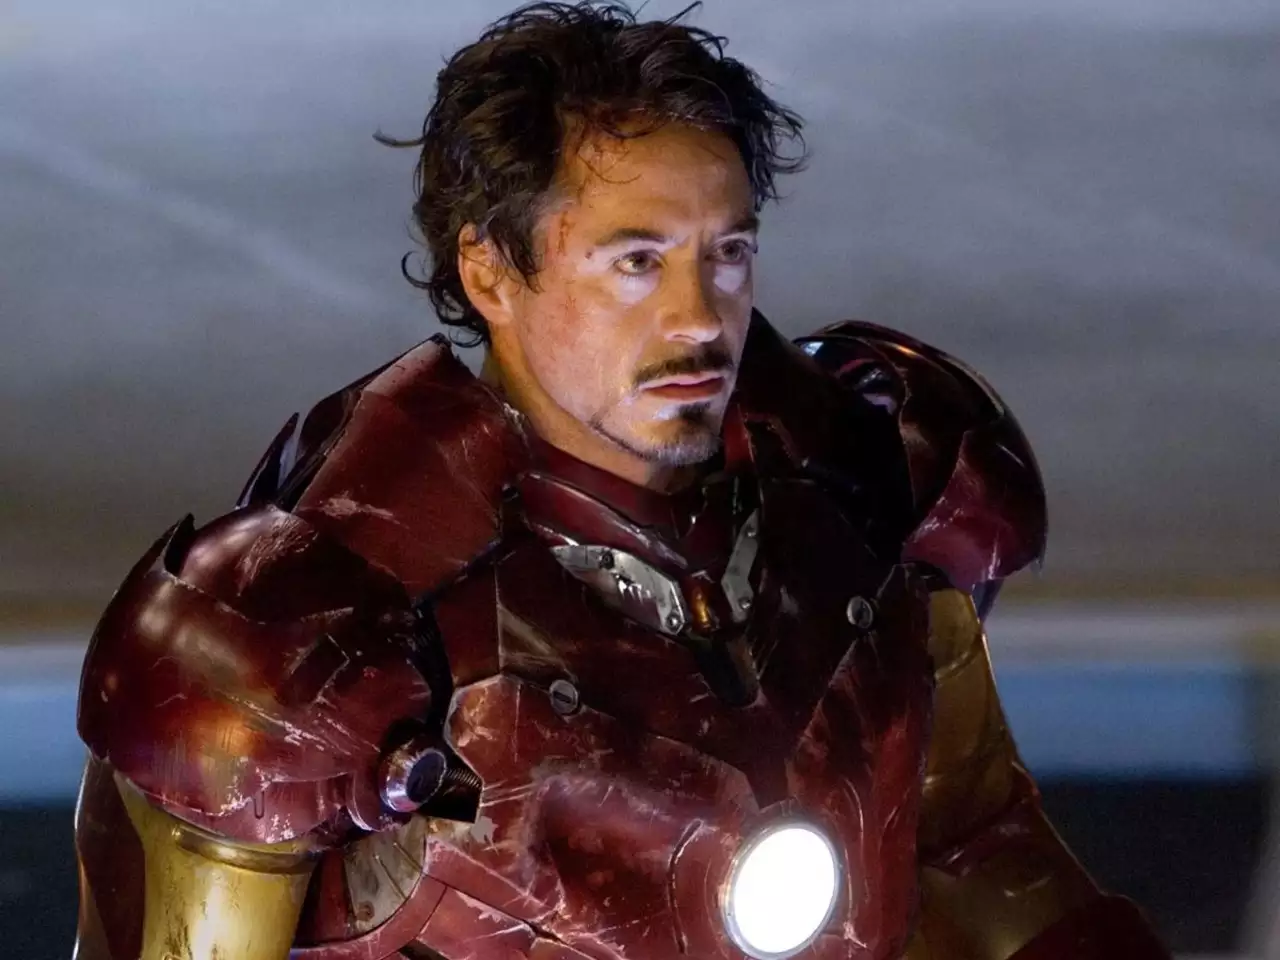 Behind the Scenes How Marvel’s Iron Man Almost Starred Tom Cruise and Why Robert Downey Jr. Got the Role-